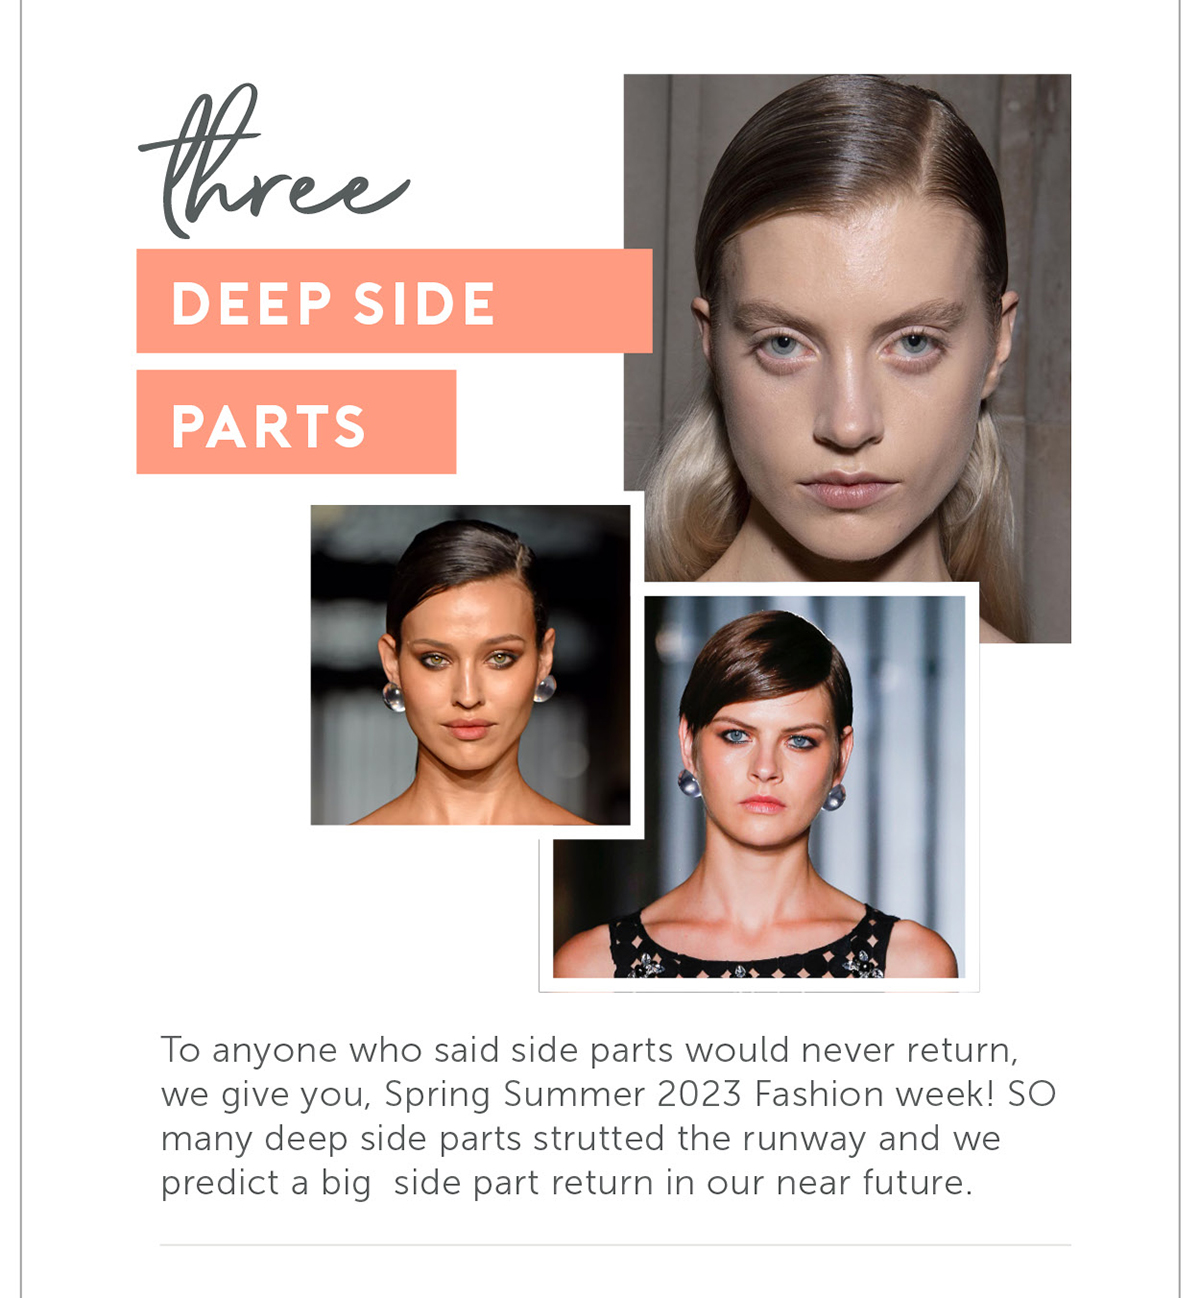 Deep Side Parts To anyone who said side parts would never return, we give you, Spring Summer 2023 Fashion week! SO many deep side parts strutted the runway and we predict a big side part return in our near future.